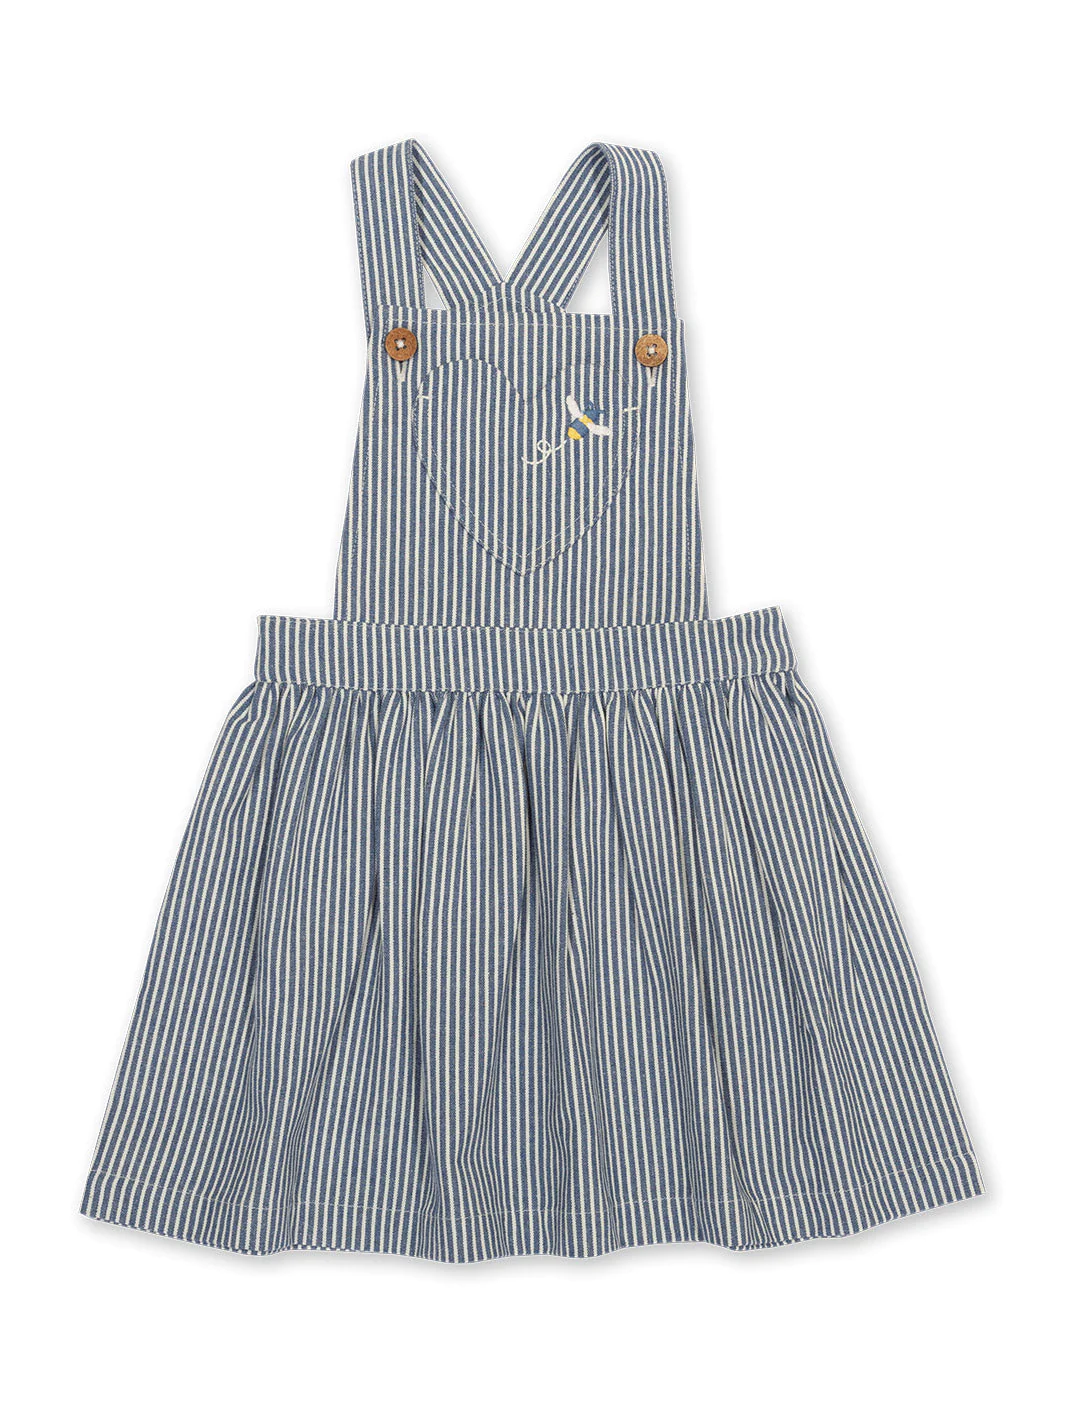 Bumble Pinafore by Kite